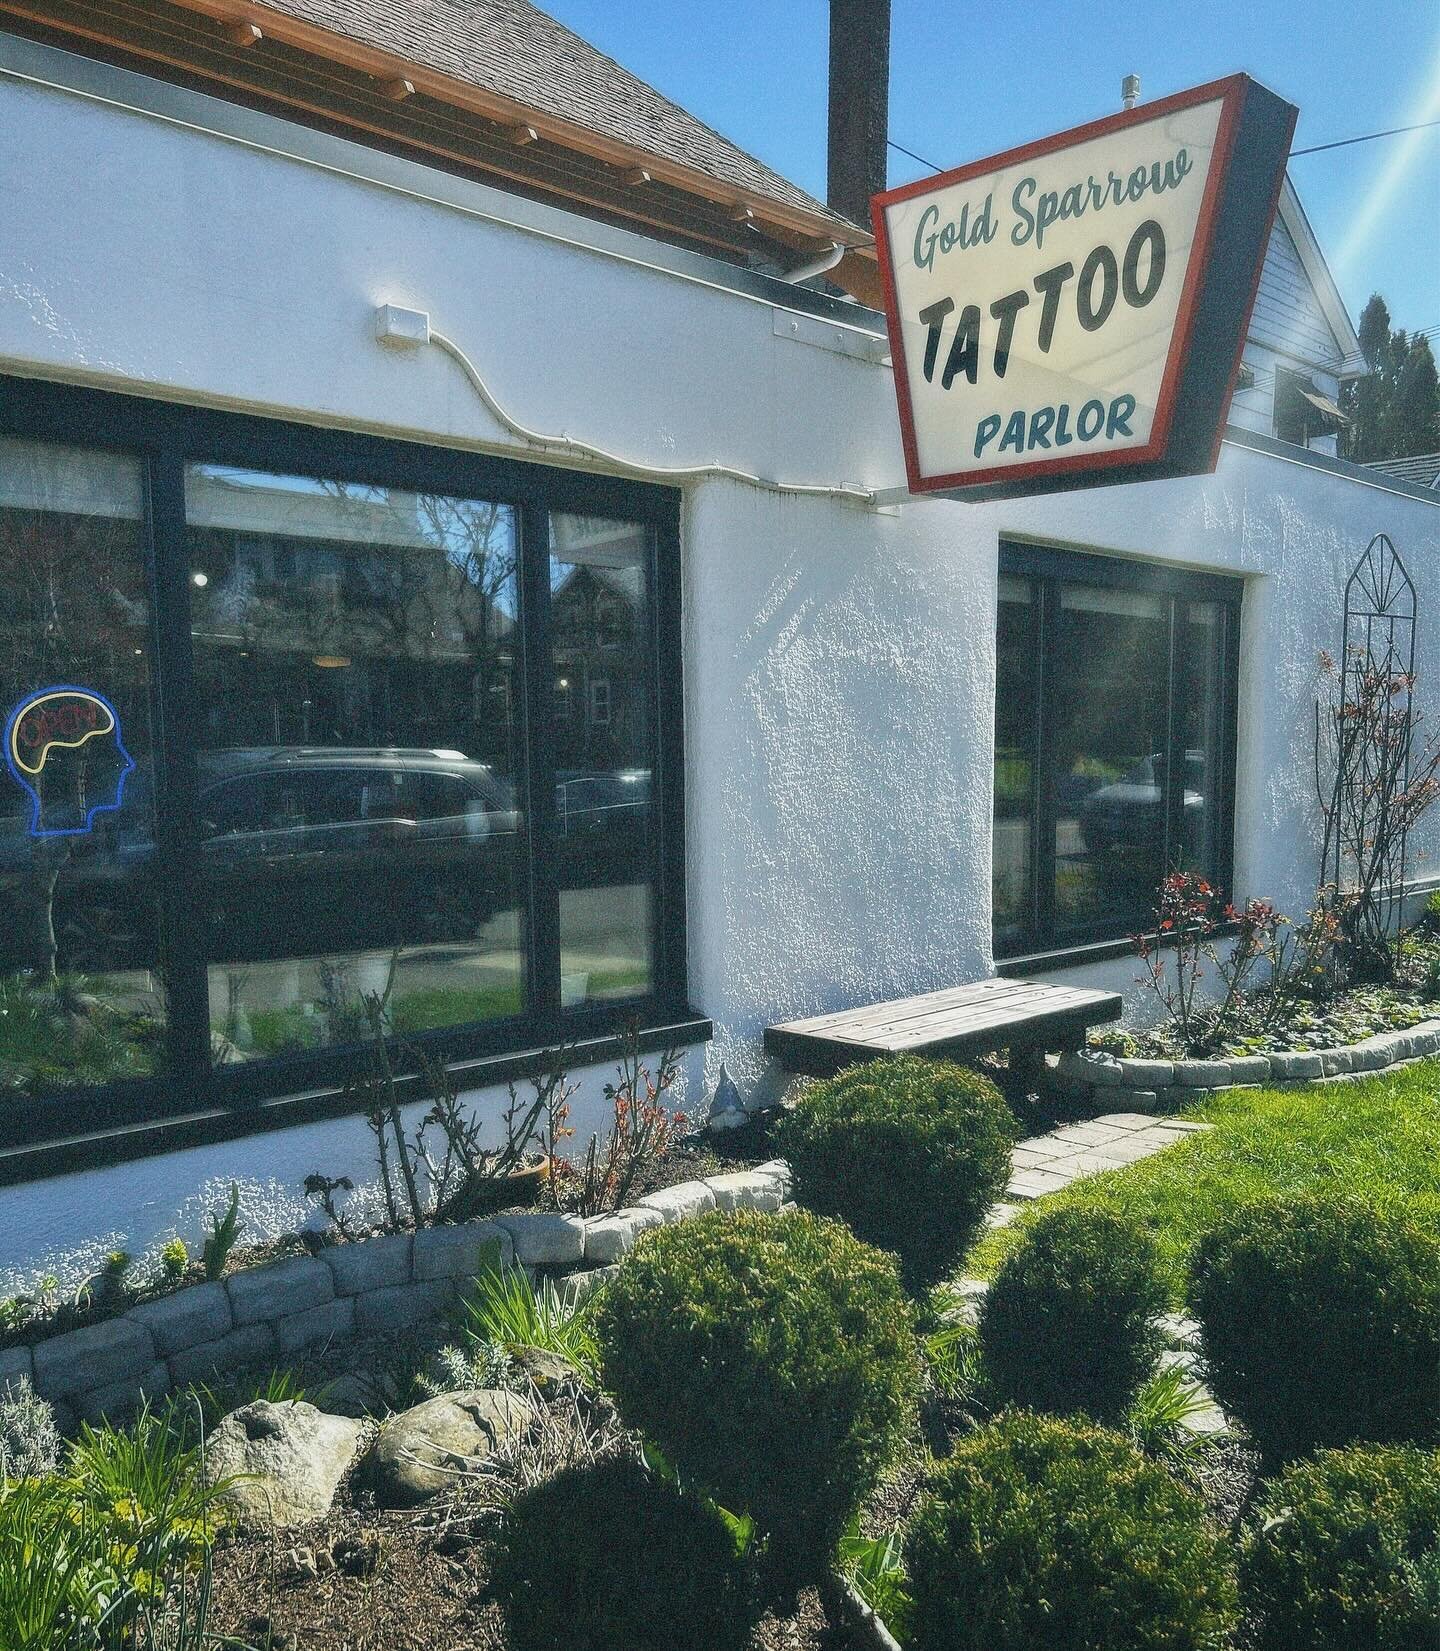 Looks like first Spring is over, which means there&rsquo;s time to get tattooed before the warm weather comes back! Taking walk-ins every day 🌷 

#portlandoregon #portlandtattoo #portlandtattooartist #portlandtattooshop #thingstodoinportland